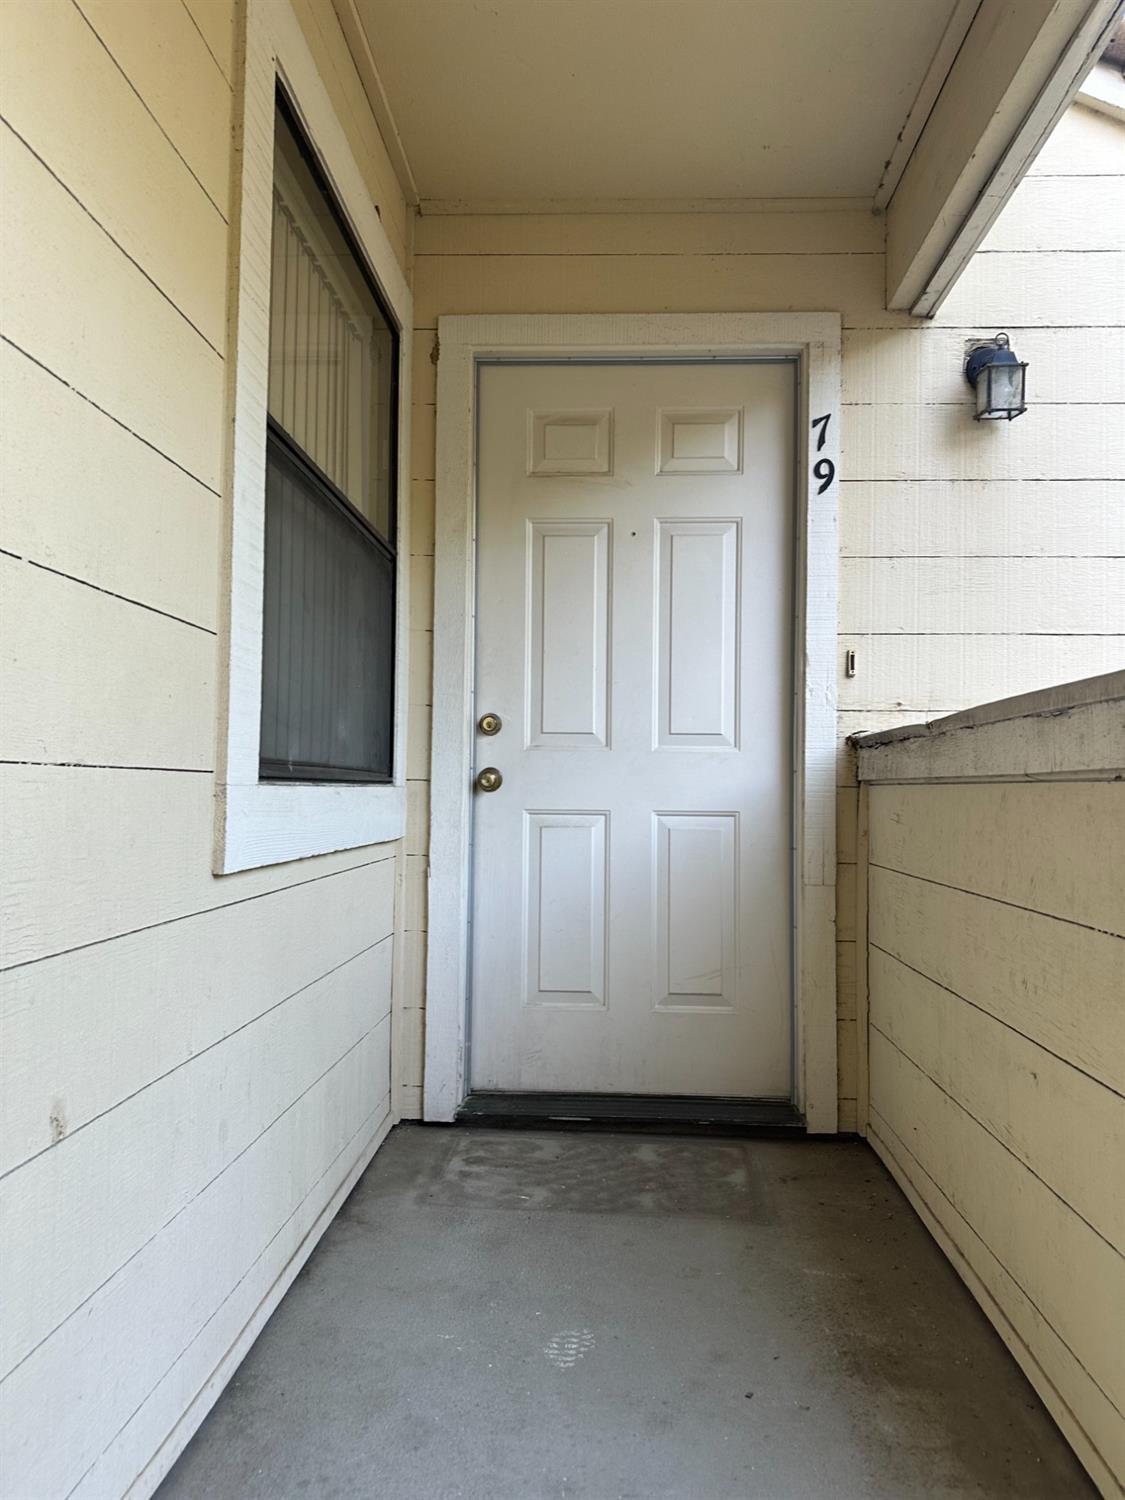 Photo of 1673 Pyrenees Ave #79 in Stockton, CA